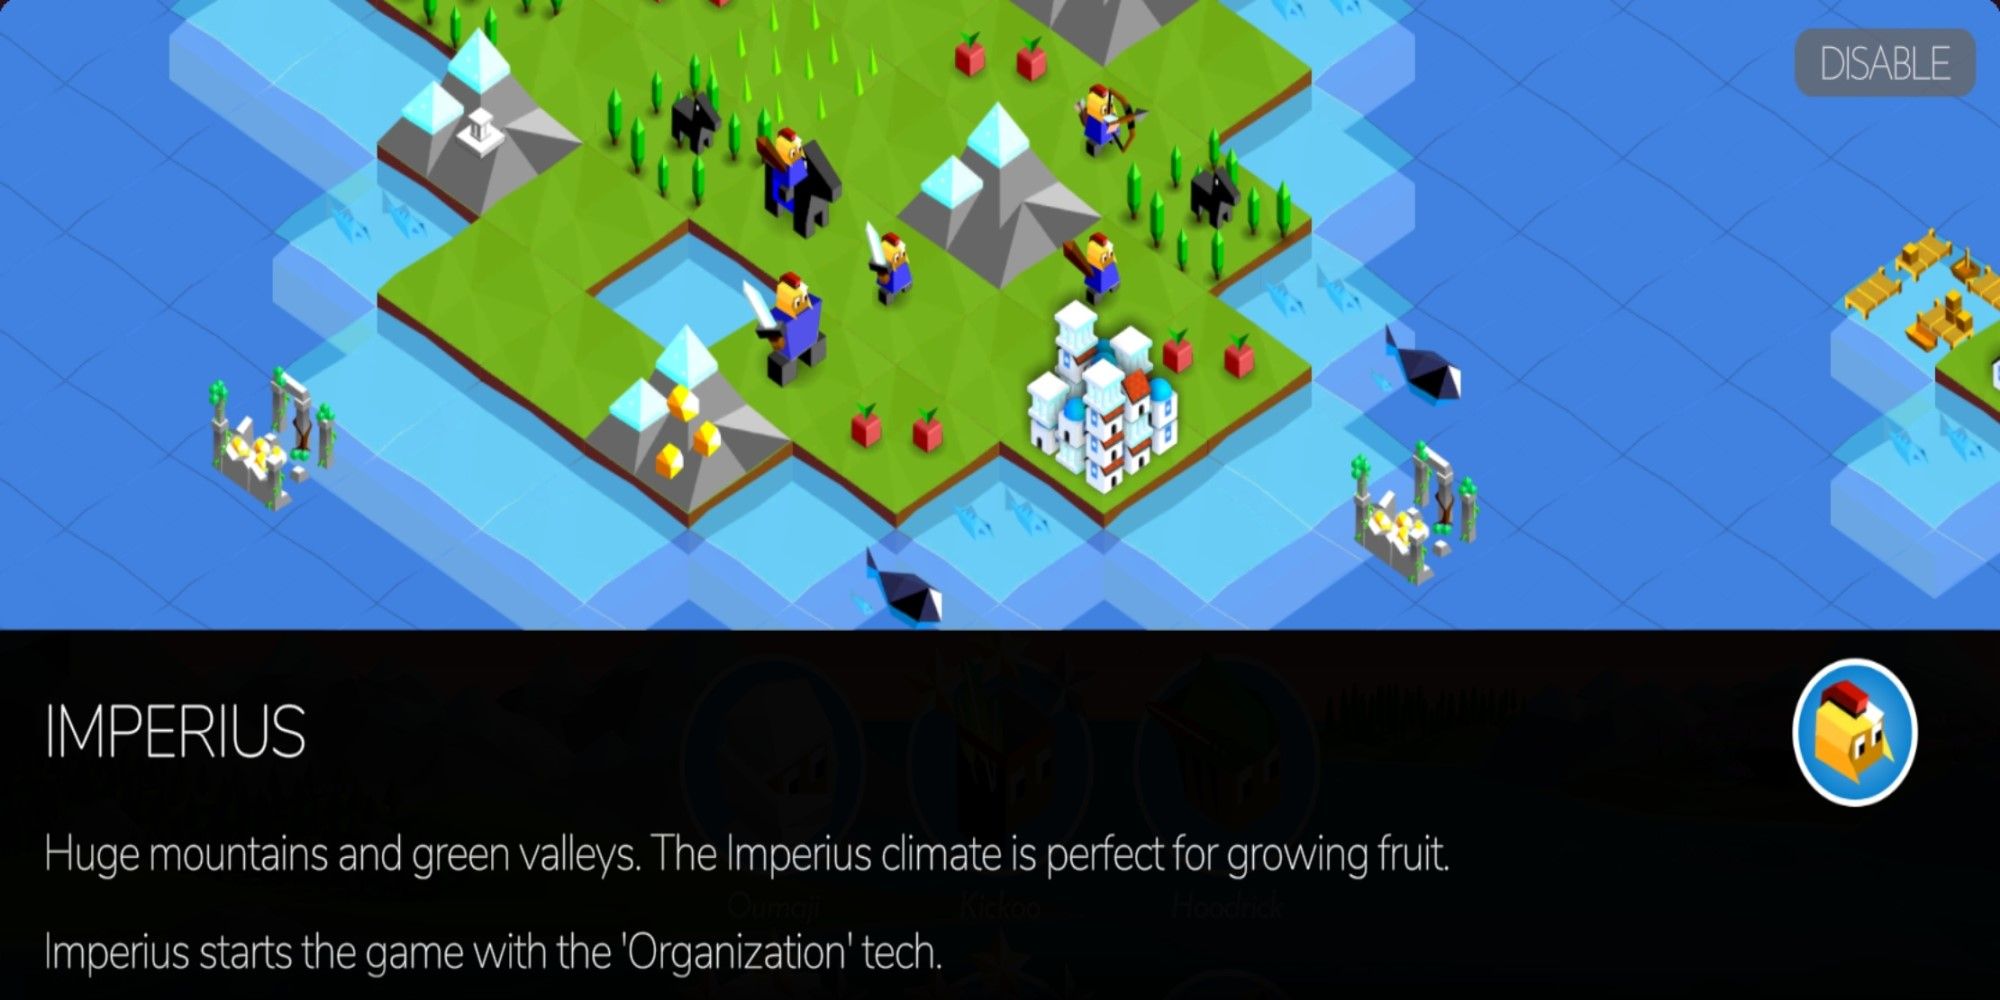 Information on the Imperius Tribe from Battle of Polytopia.